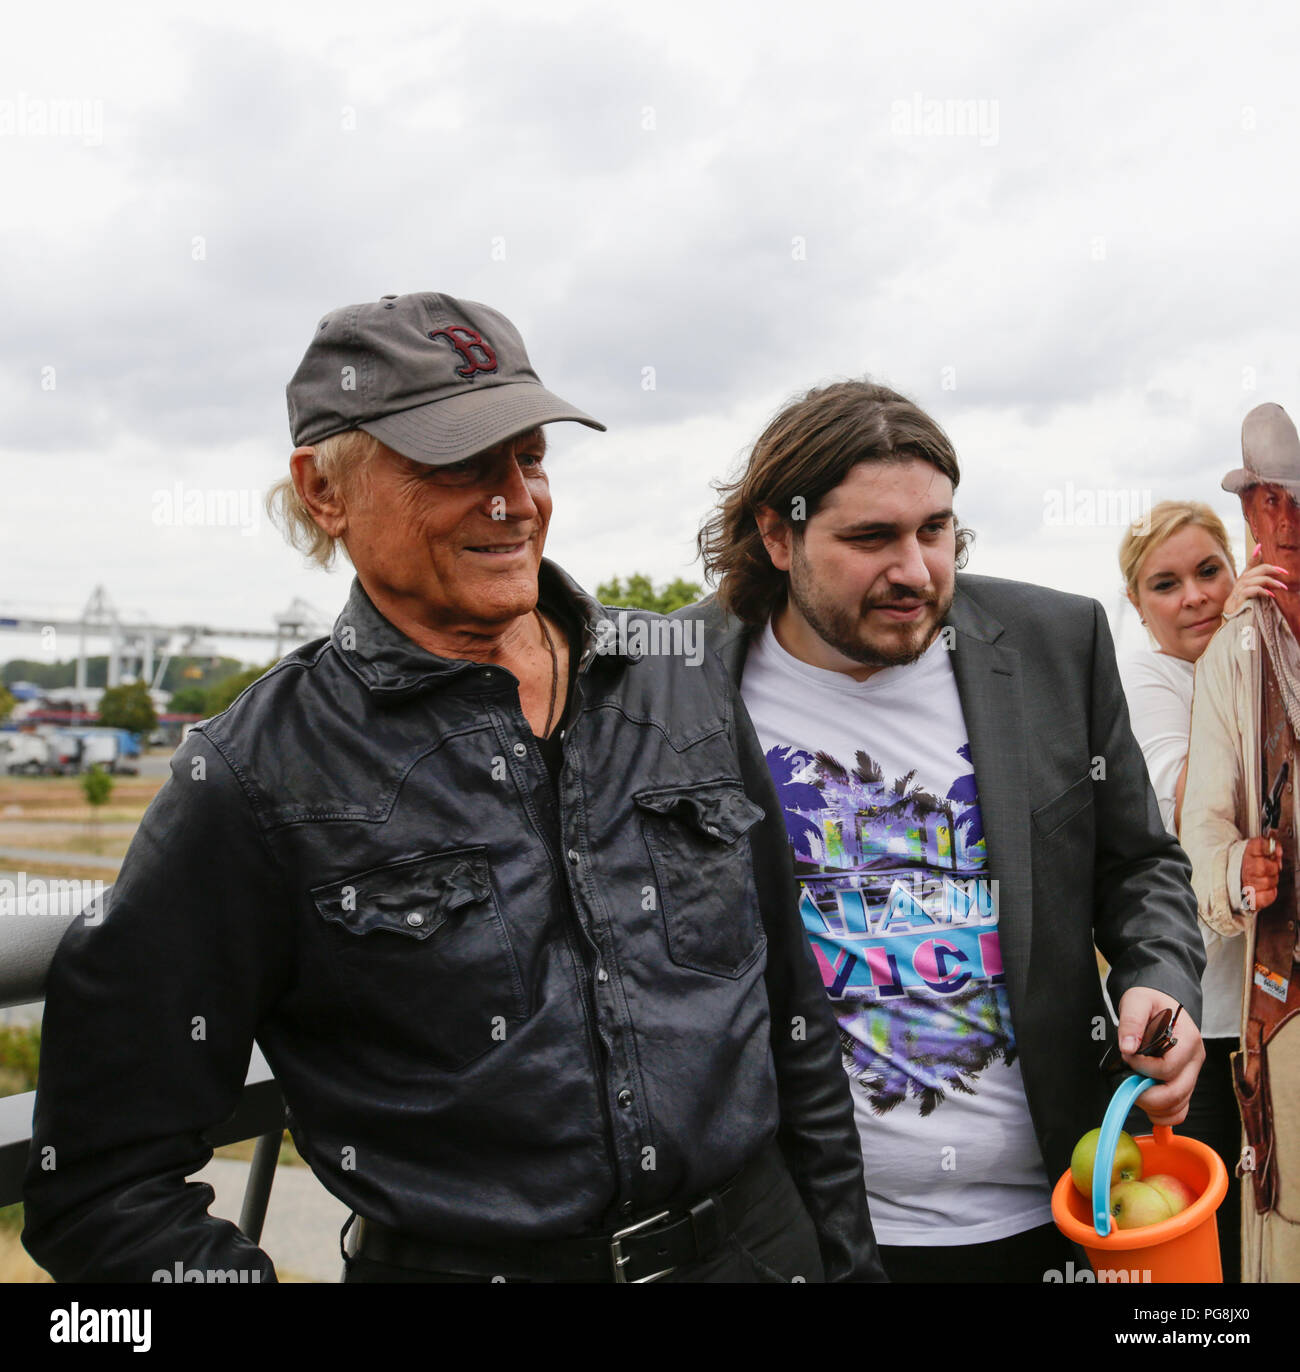 Worms, Germany. 24th August 2018. Terence Hill (left) and actor Peter Englert (right), who initiated the renaming of the bridge to Terence-Hill-Bridge, are pictured on the bridge. Italian actor Terence Hill visited the German city of Worms, to present his new movie (My Name is somebody). Terence Hill added the stop in Worms to his movie promotion tour in Germany, to visit a pedestrian bridge, that is unofficially named Terence-Hill-Bridge (officially Karl-Kubel-Bridge). Stock Photo